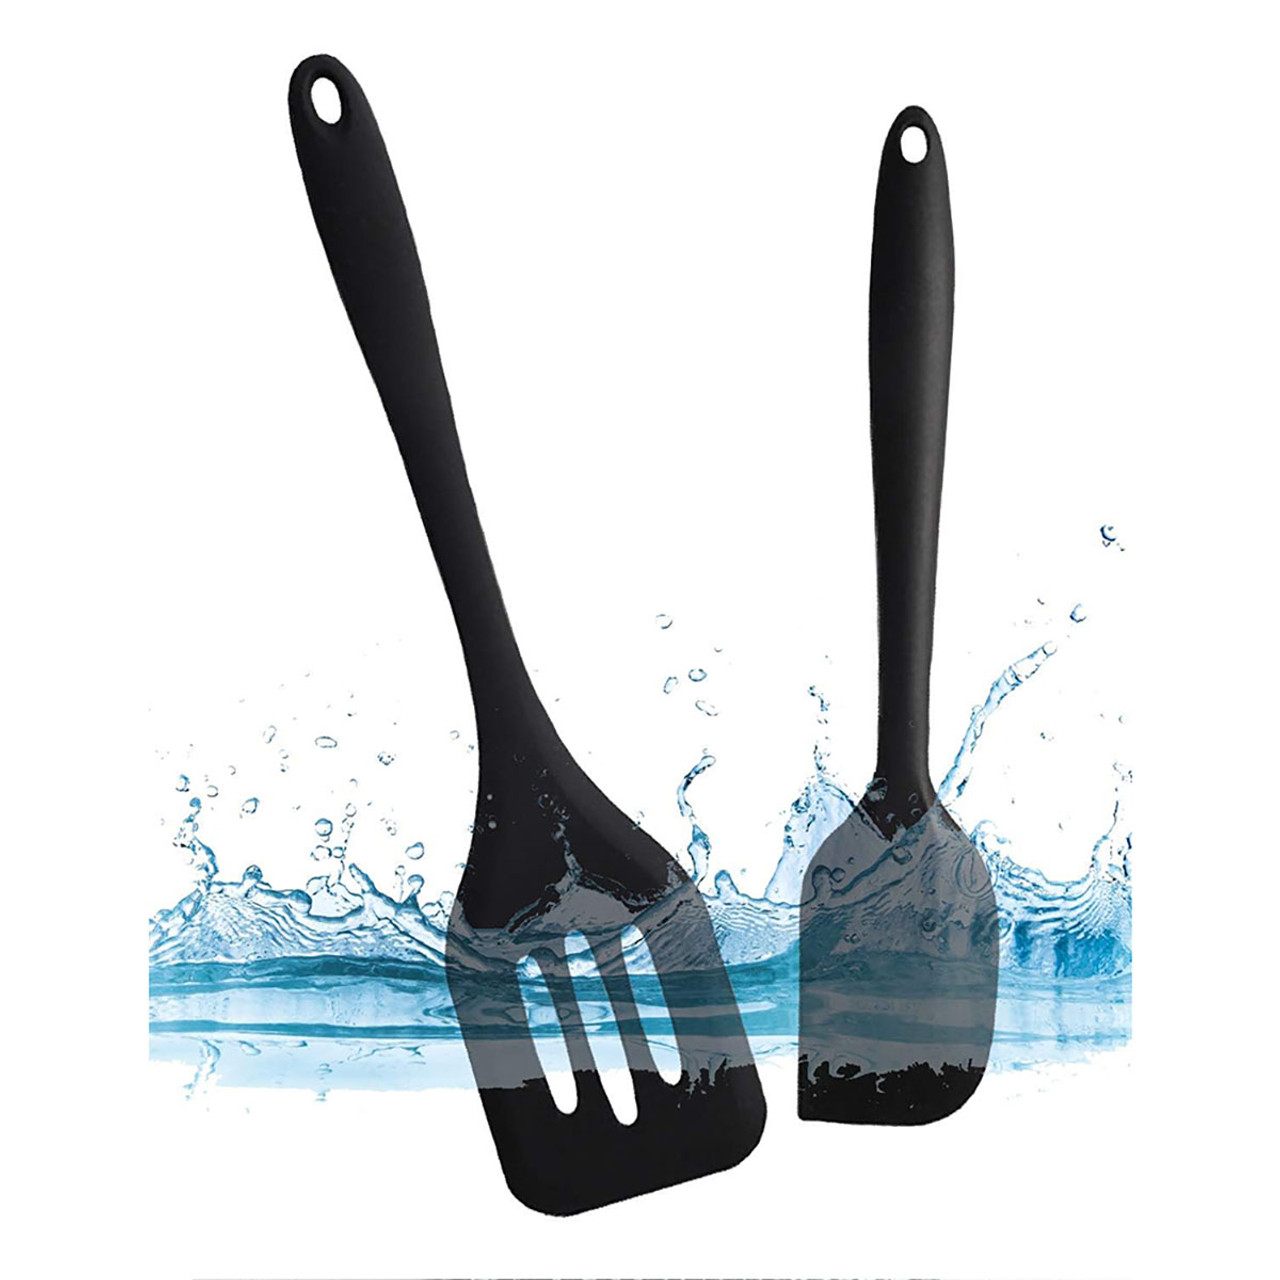 Kitchen Silicone Cooking Utensils (Set of 5) product image